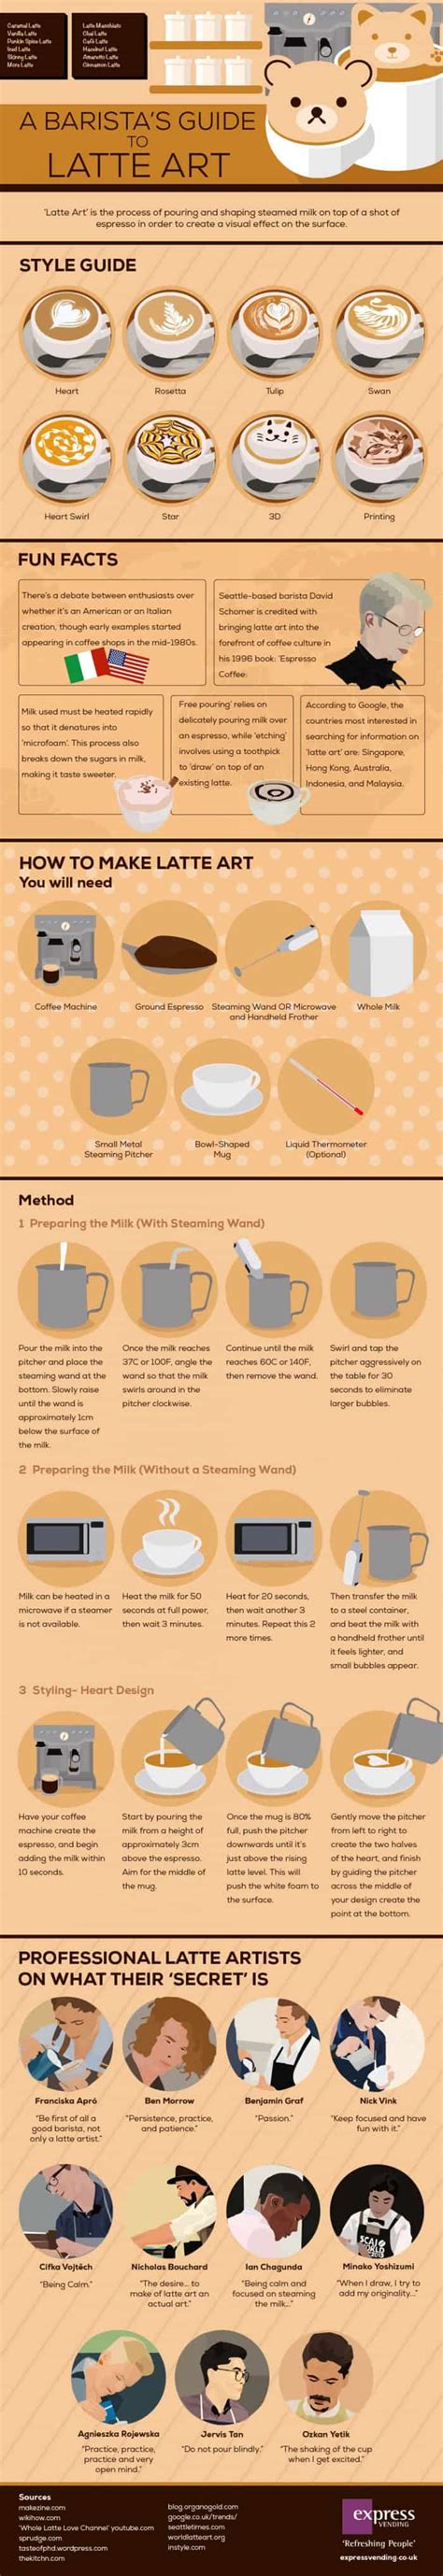 The Baristas Guide To Latte Art Daily Infographic